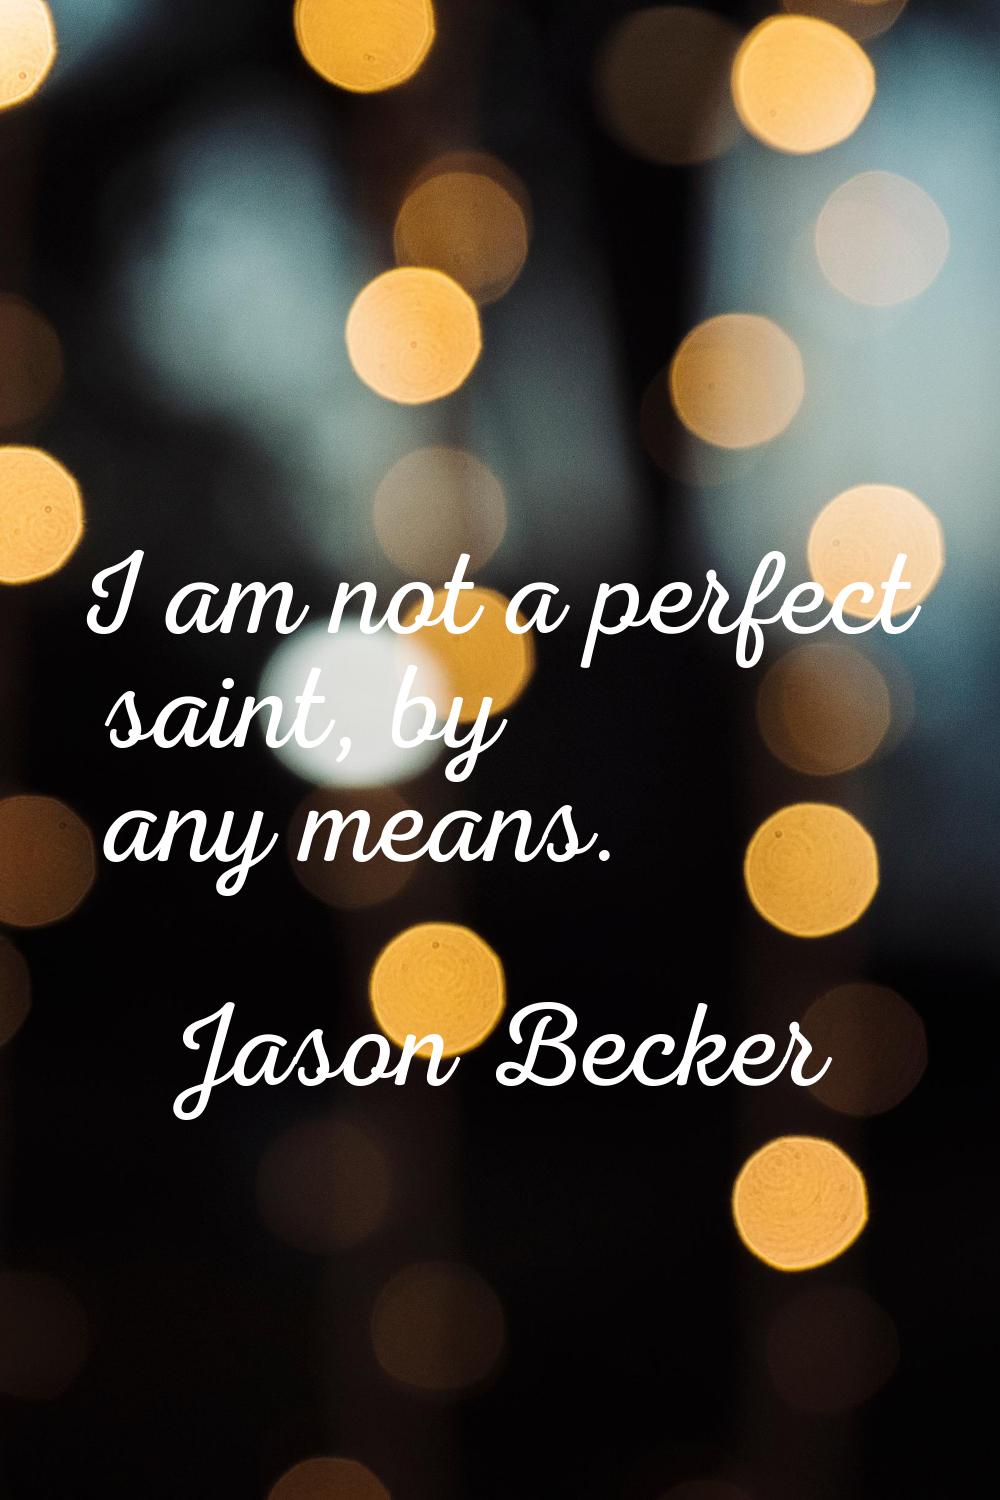 I am not a perfect saint, by any means.